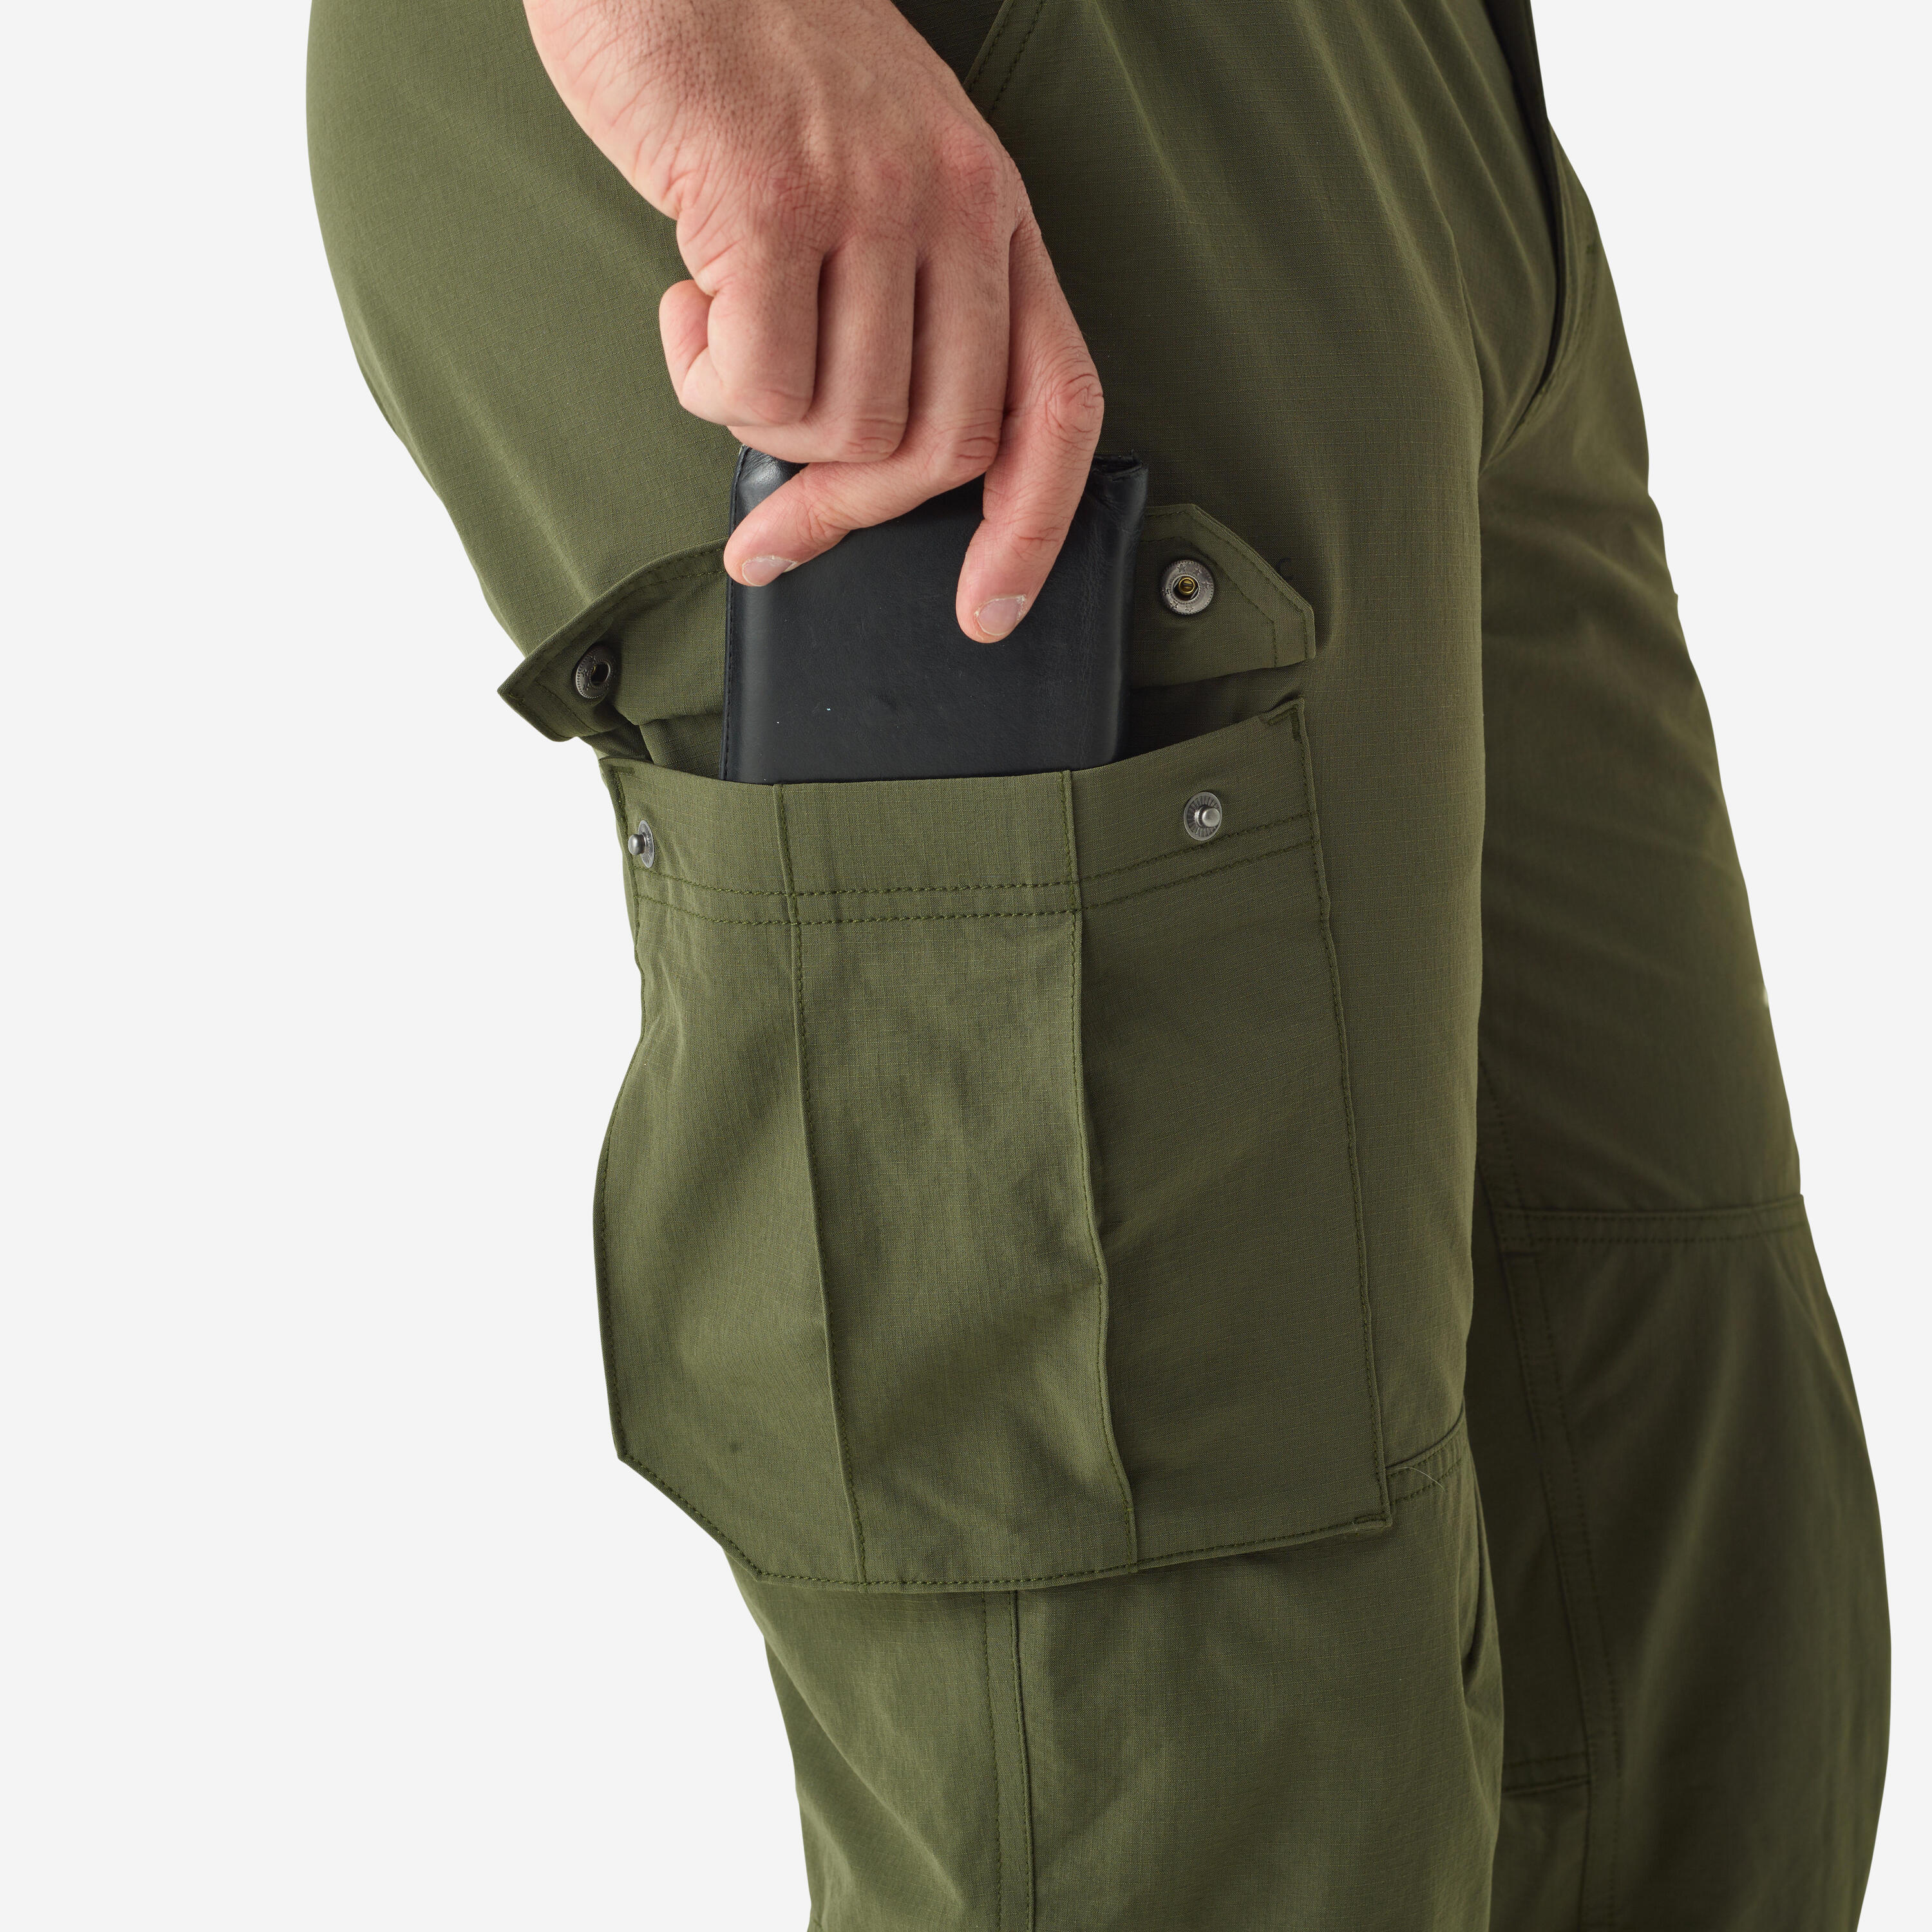 LIGHT BREATHABLE TROUSERS 500 GREEN 7/8